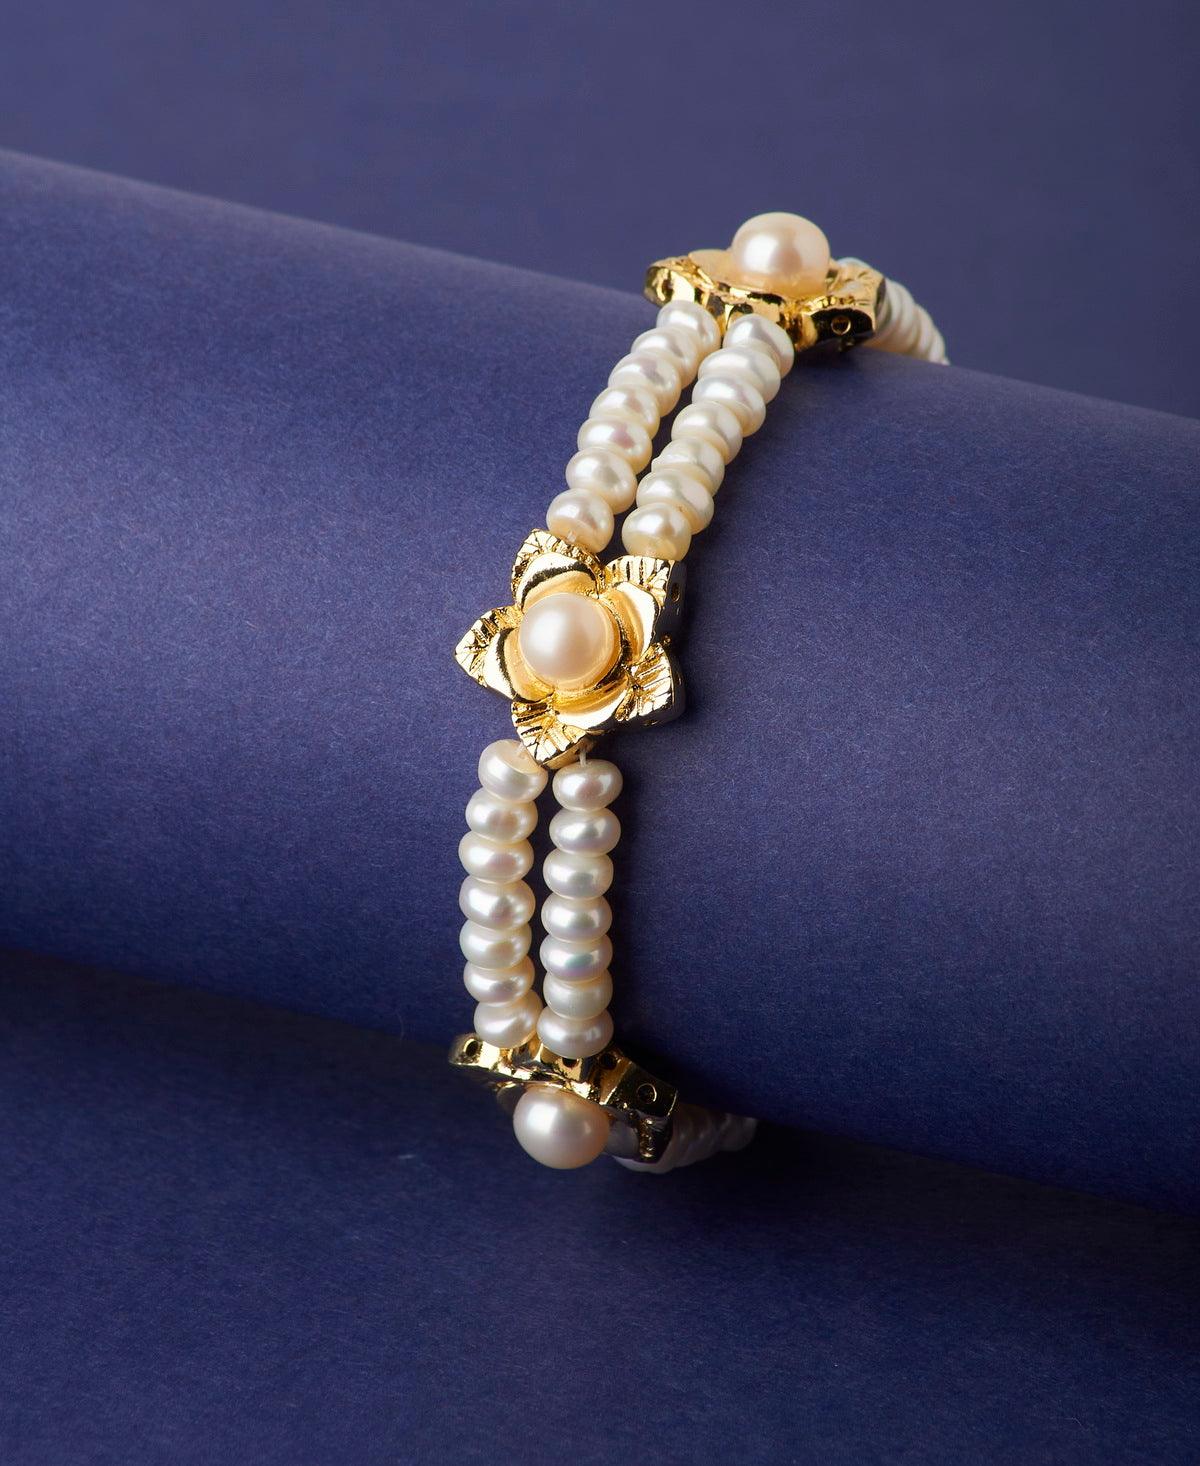 Which is the best Chandrani Pearl outlet that has a huge collection? - Quora